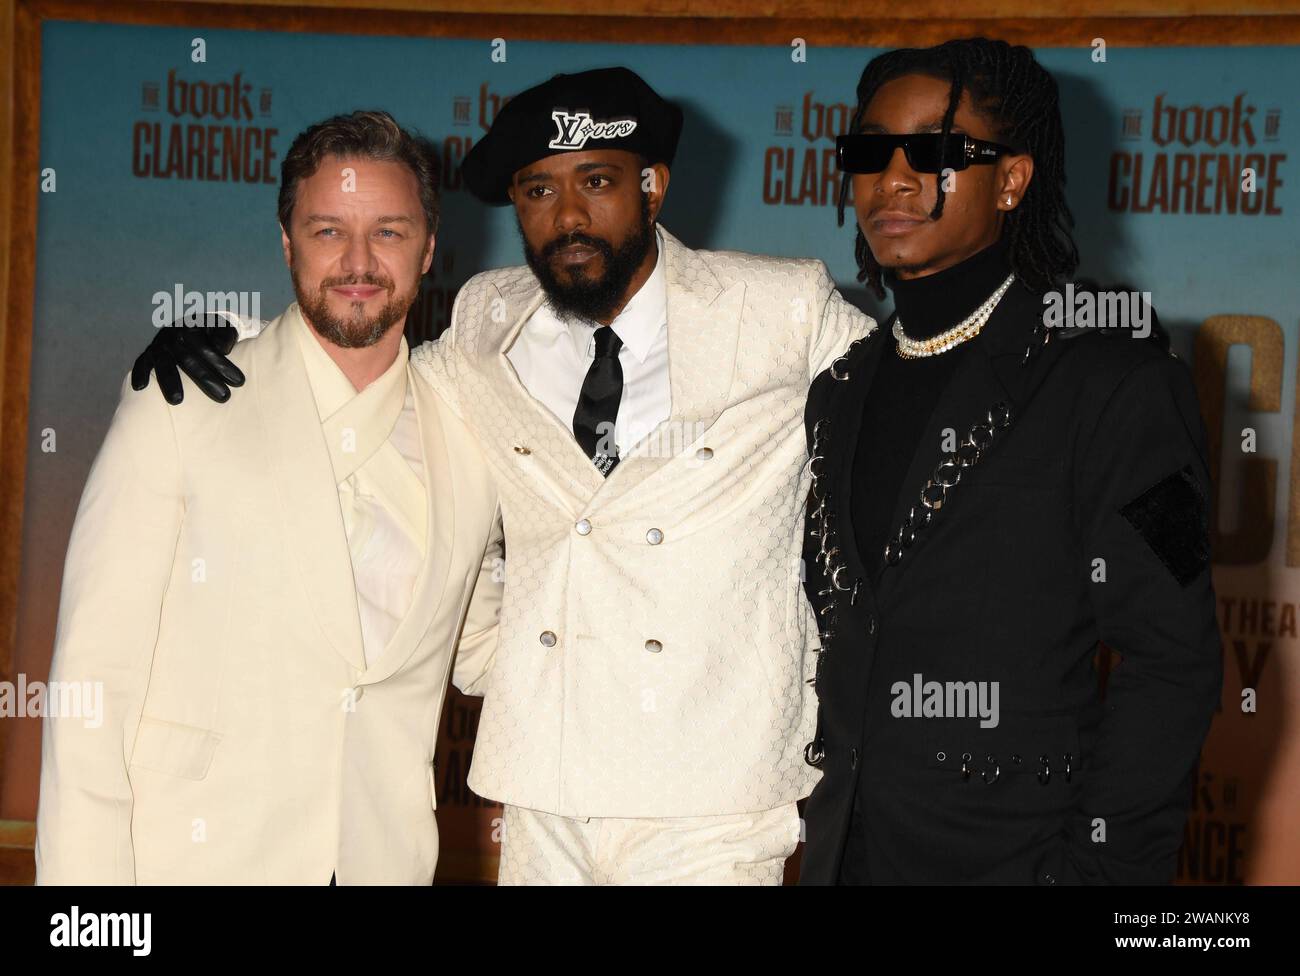 LOS ANGELES, CA - JANUARY 5: James McAvoy, LaKeith Stanfield and RJ Cyler at The Book of Clarence LA Premiere on January 5, 2024 at The Academy Museum of Motion Pictures in Los Angeles, California. Copyright: xJeffreyxMayerx Stock Photo